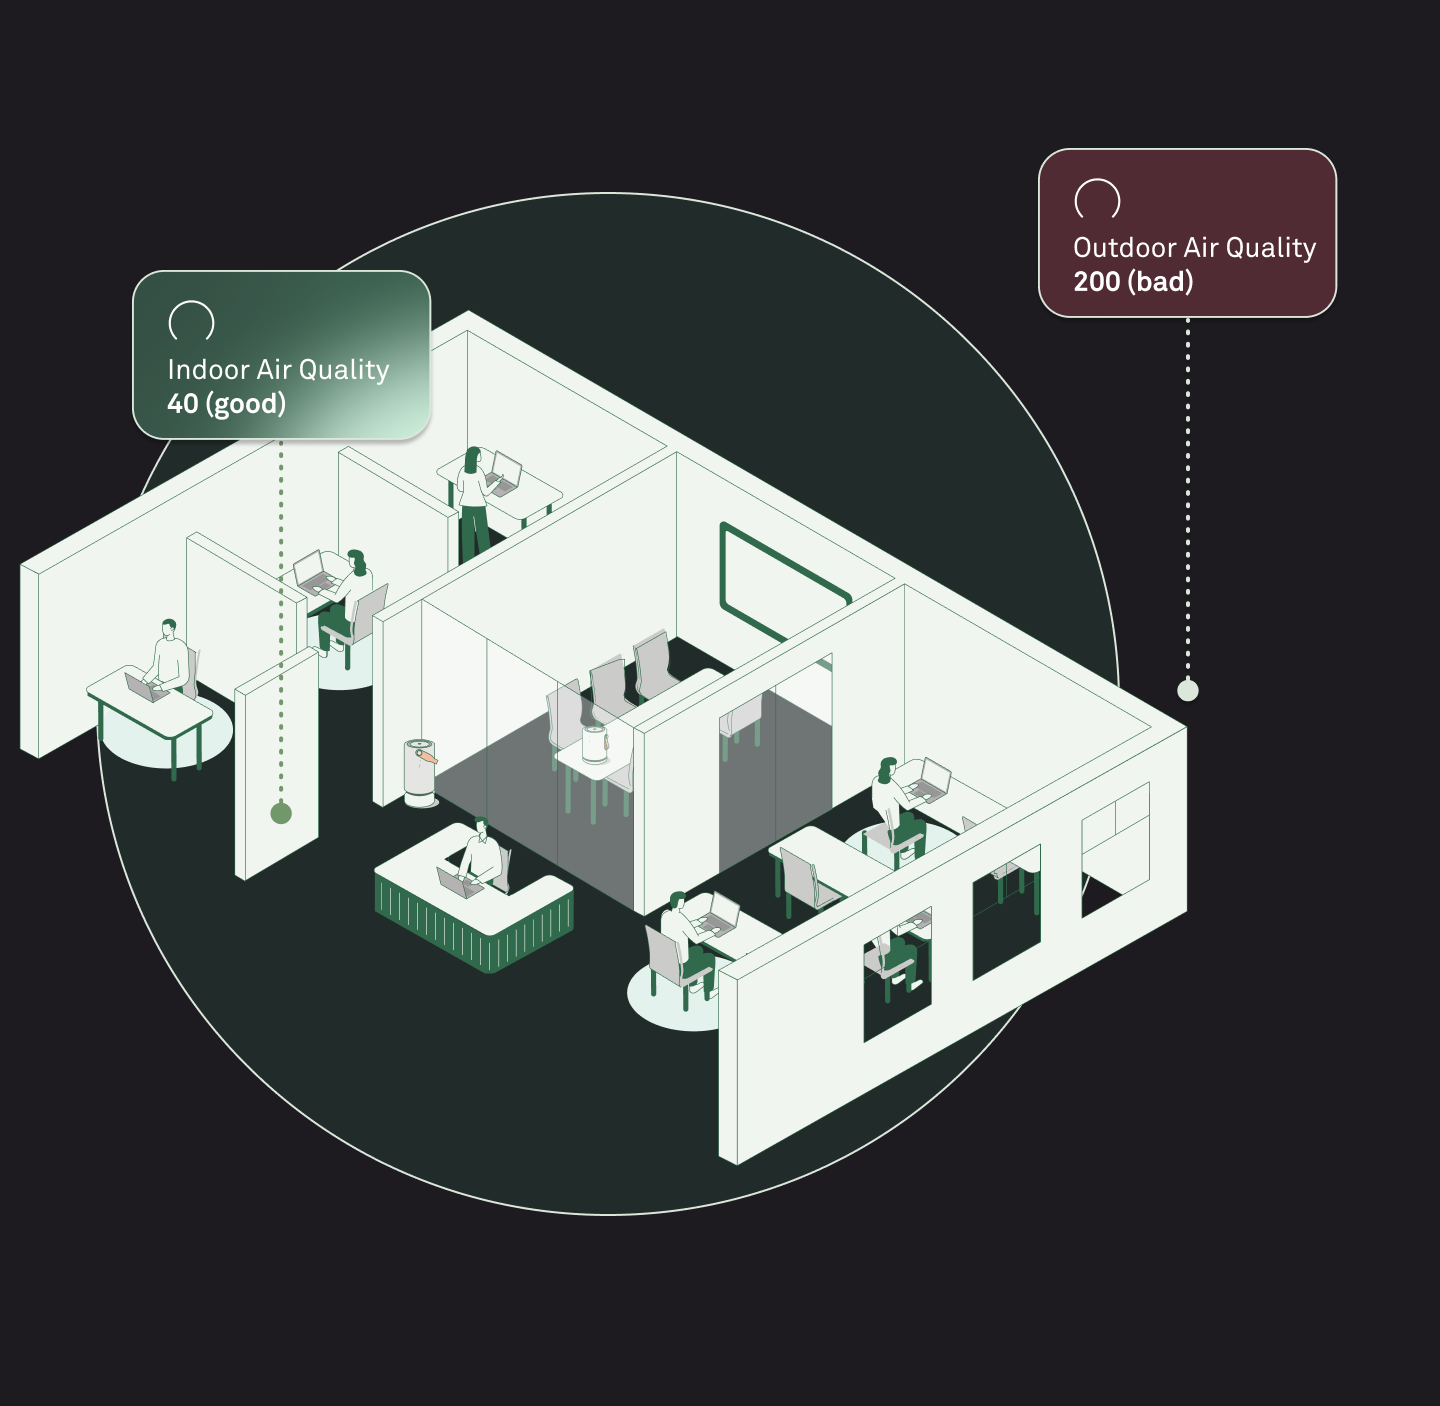 Illustration of an office with multiple rooms with a callout showing the indoor air quality at 40 (good) and a callout showing outdoor air quality at 200 (bad)